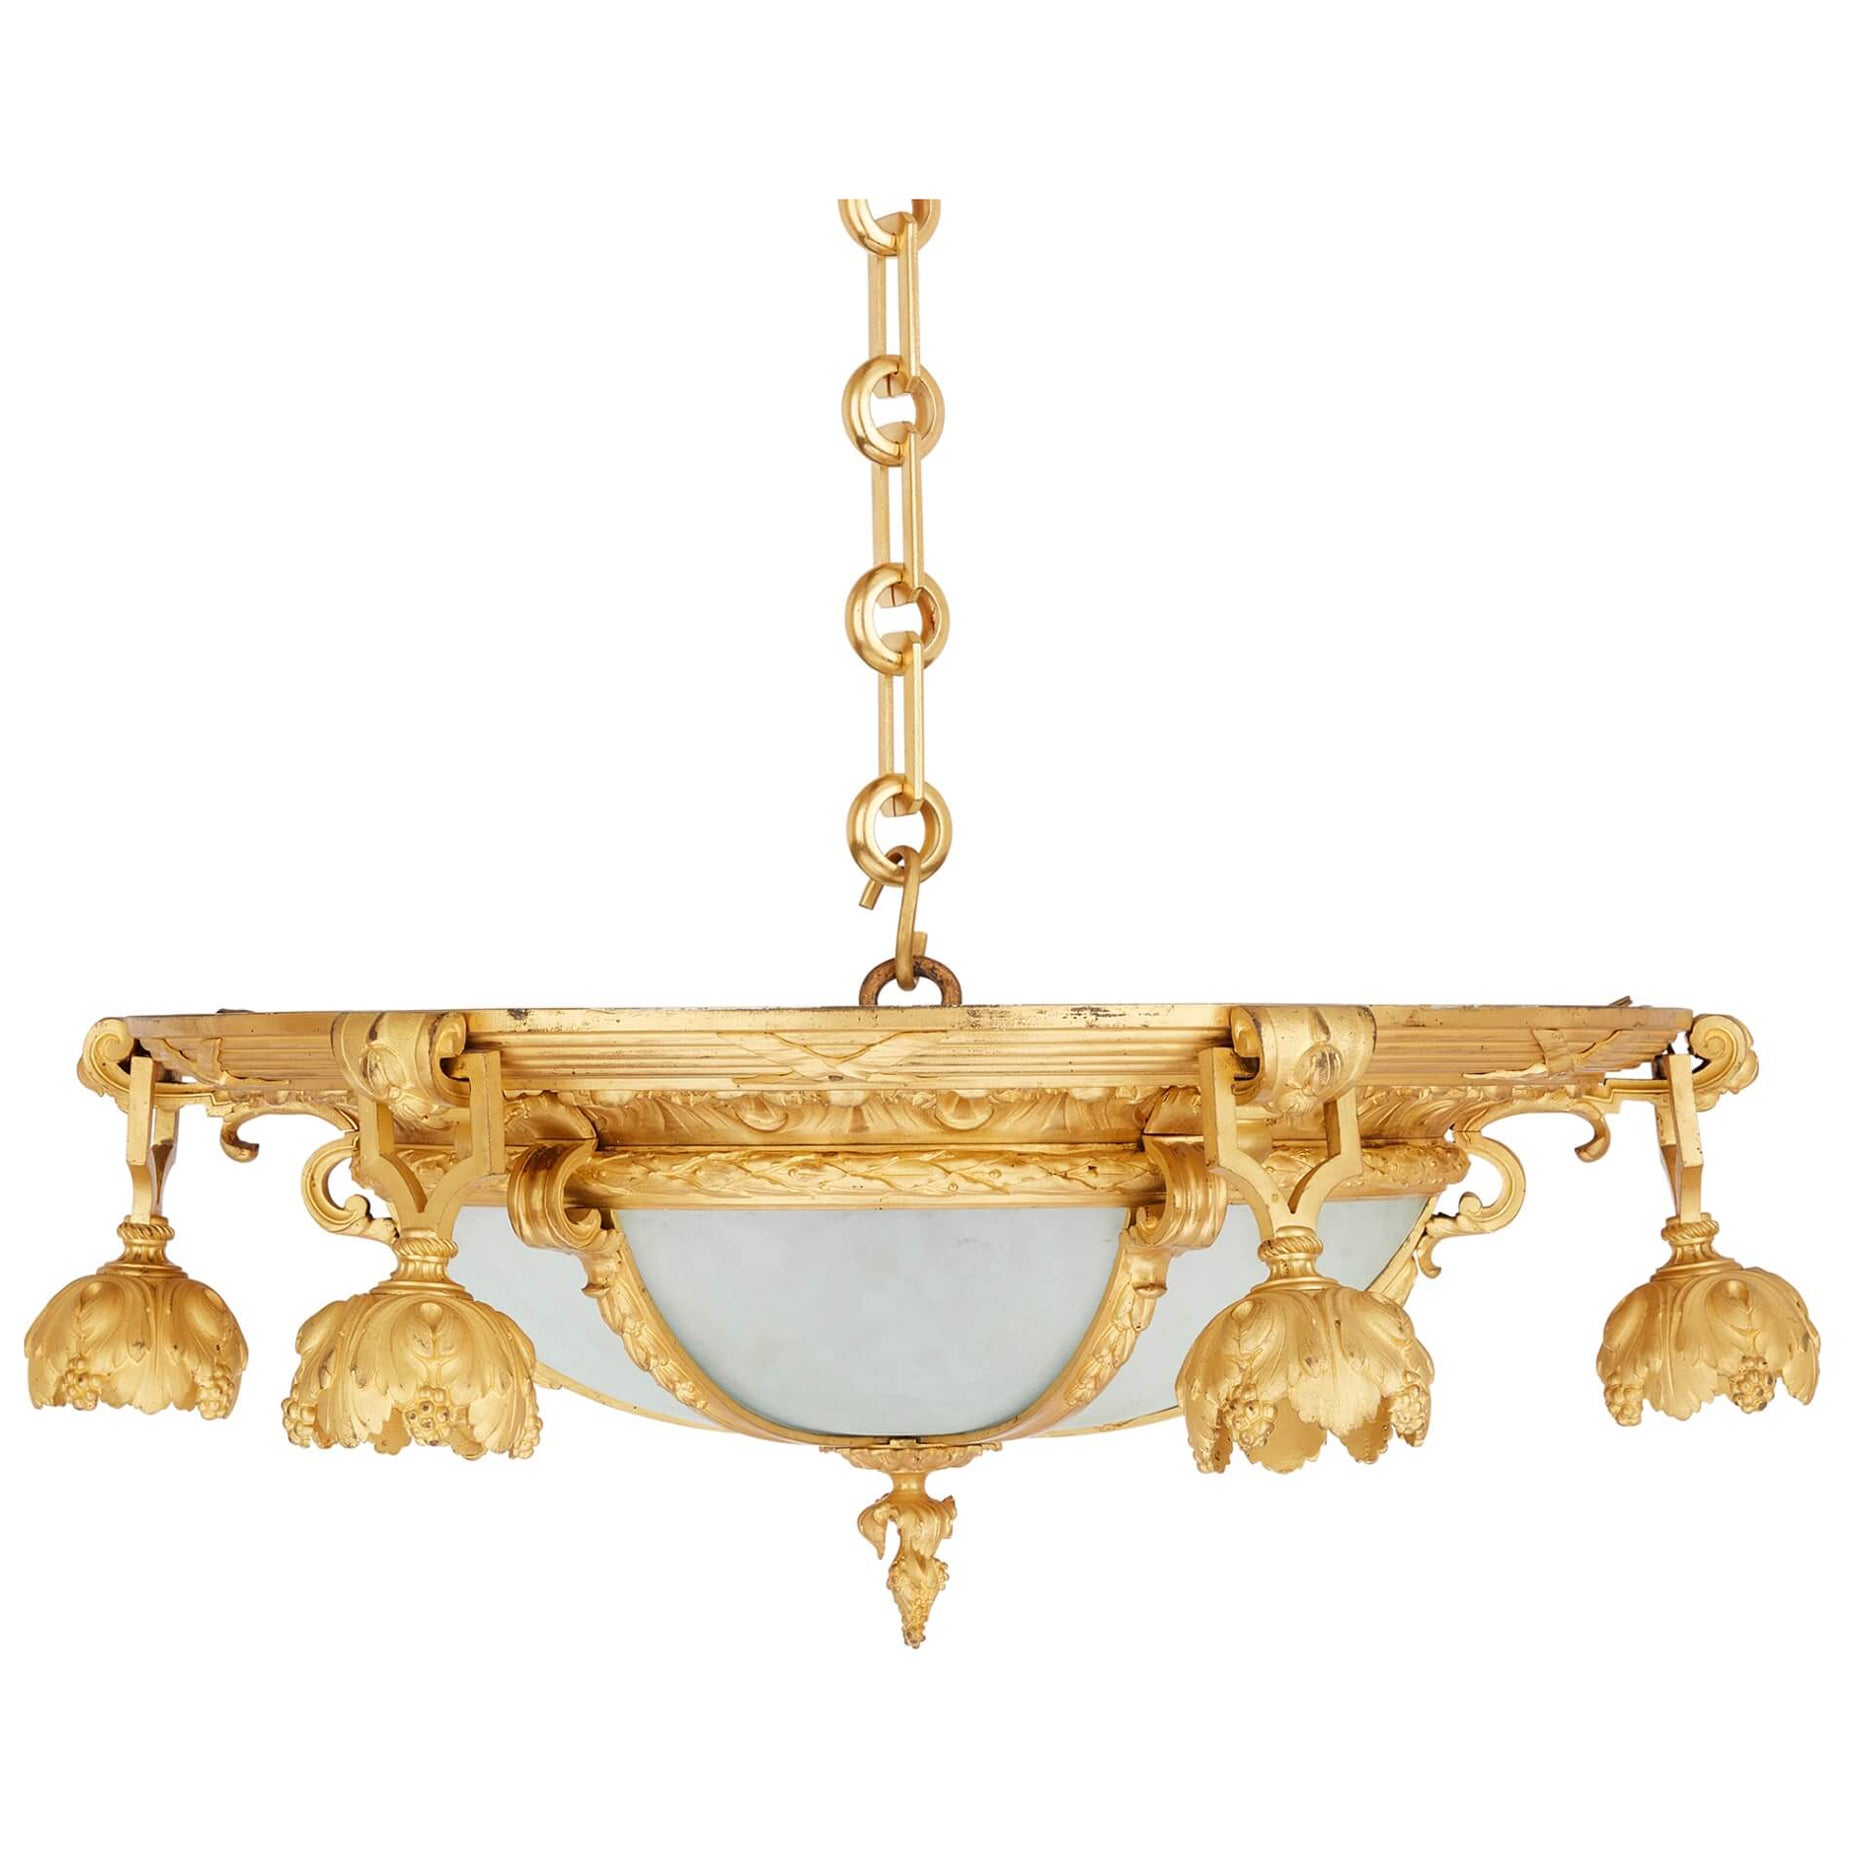 19th Century French Gilt Bronze and Glass Six-Light Chandelier